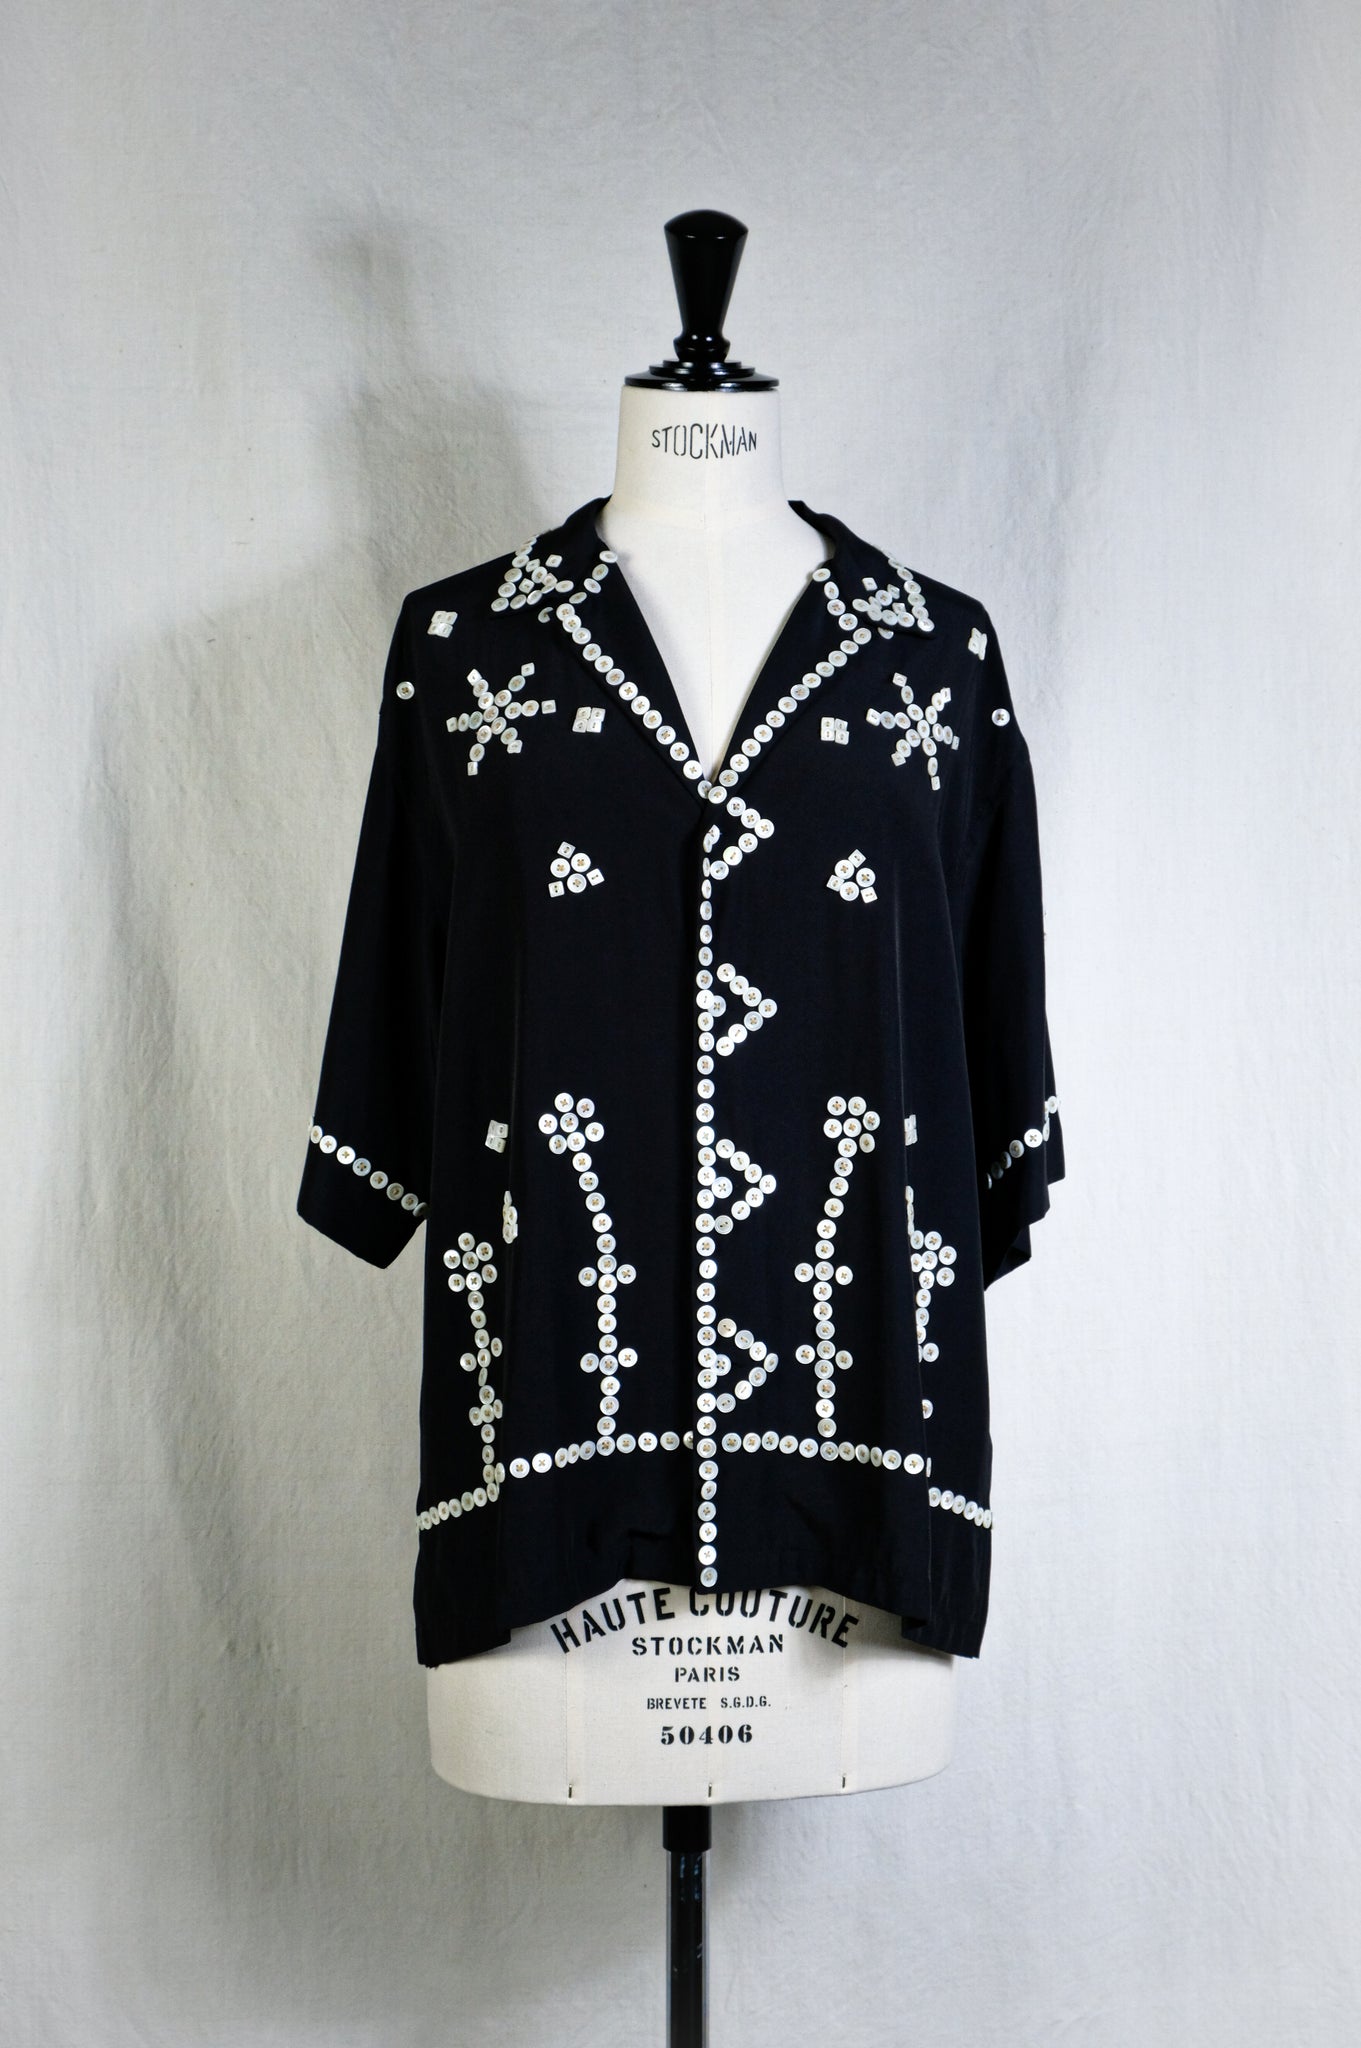 CURRENTAGE "PEARLY KING AND QUEENS SHORT SLEEVE SHIRT"